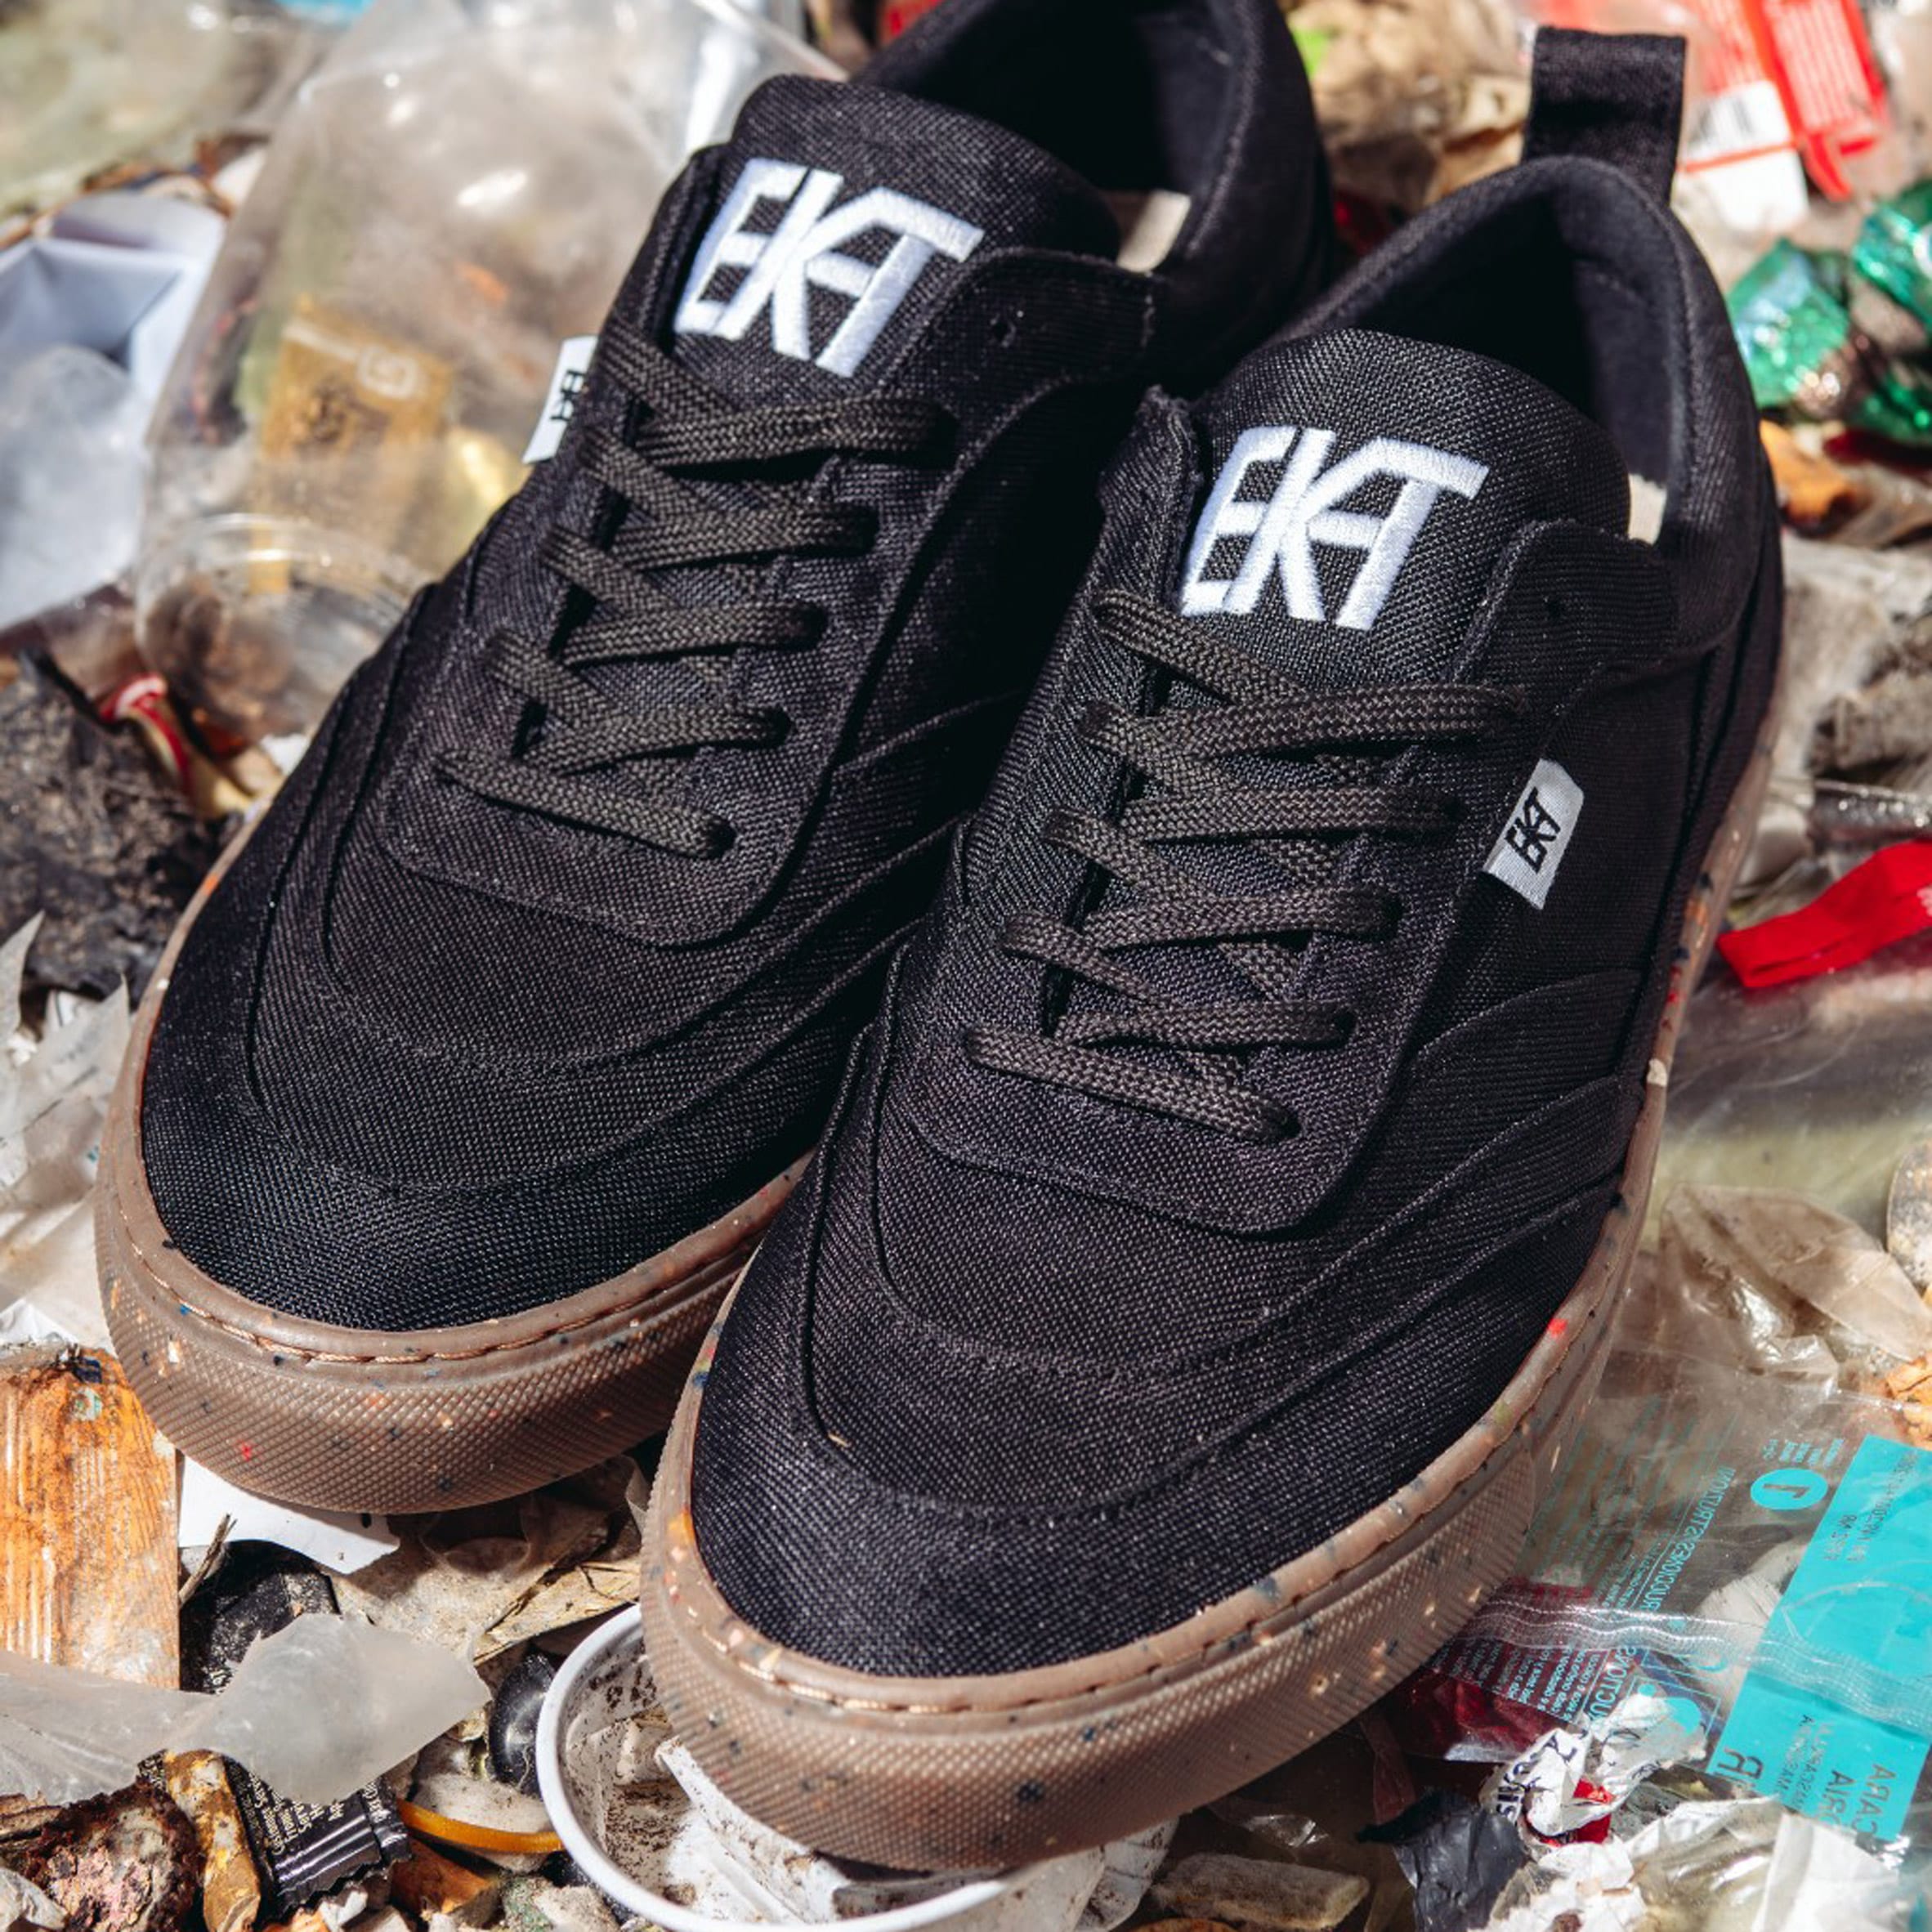 A pair of black trainers photographed on rubbish